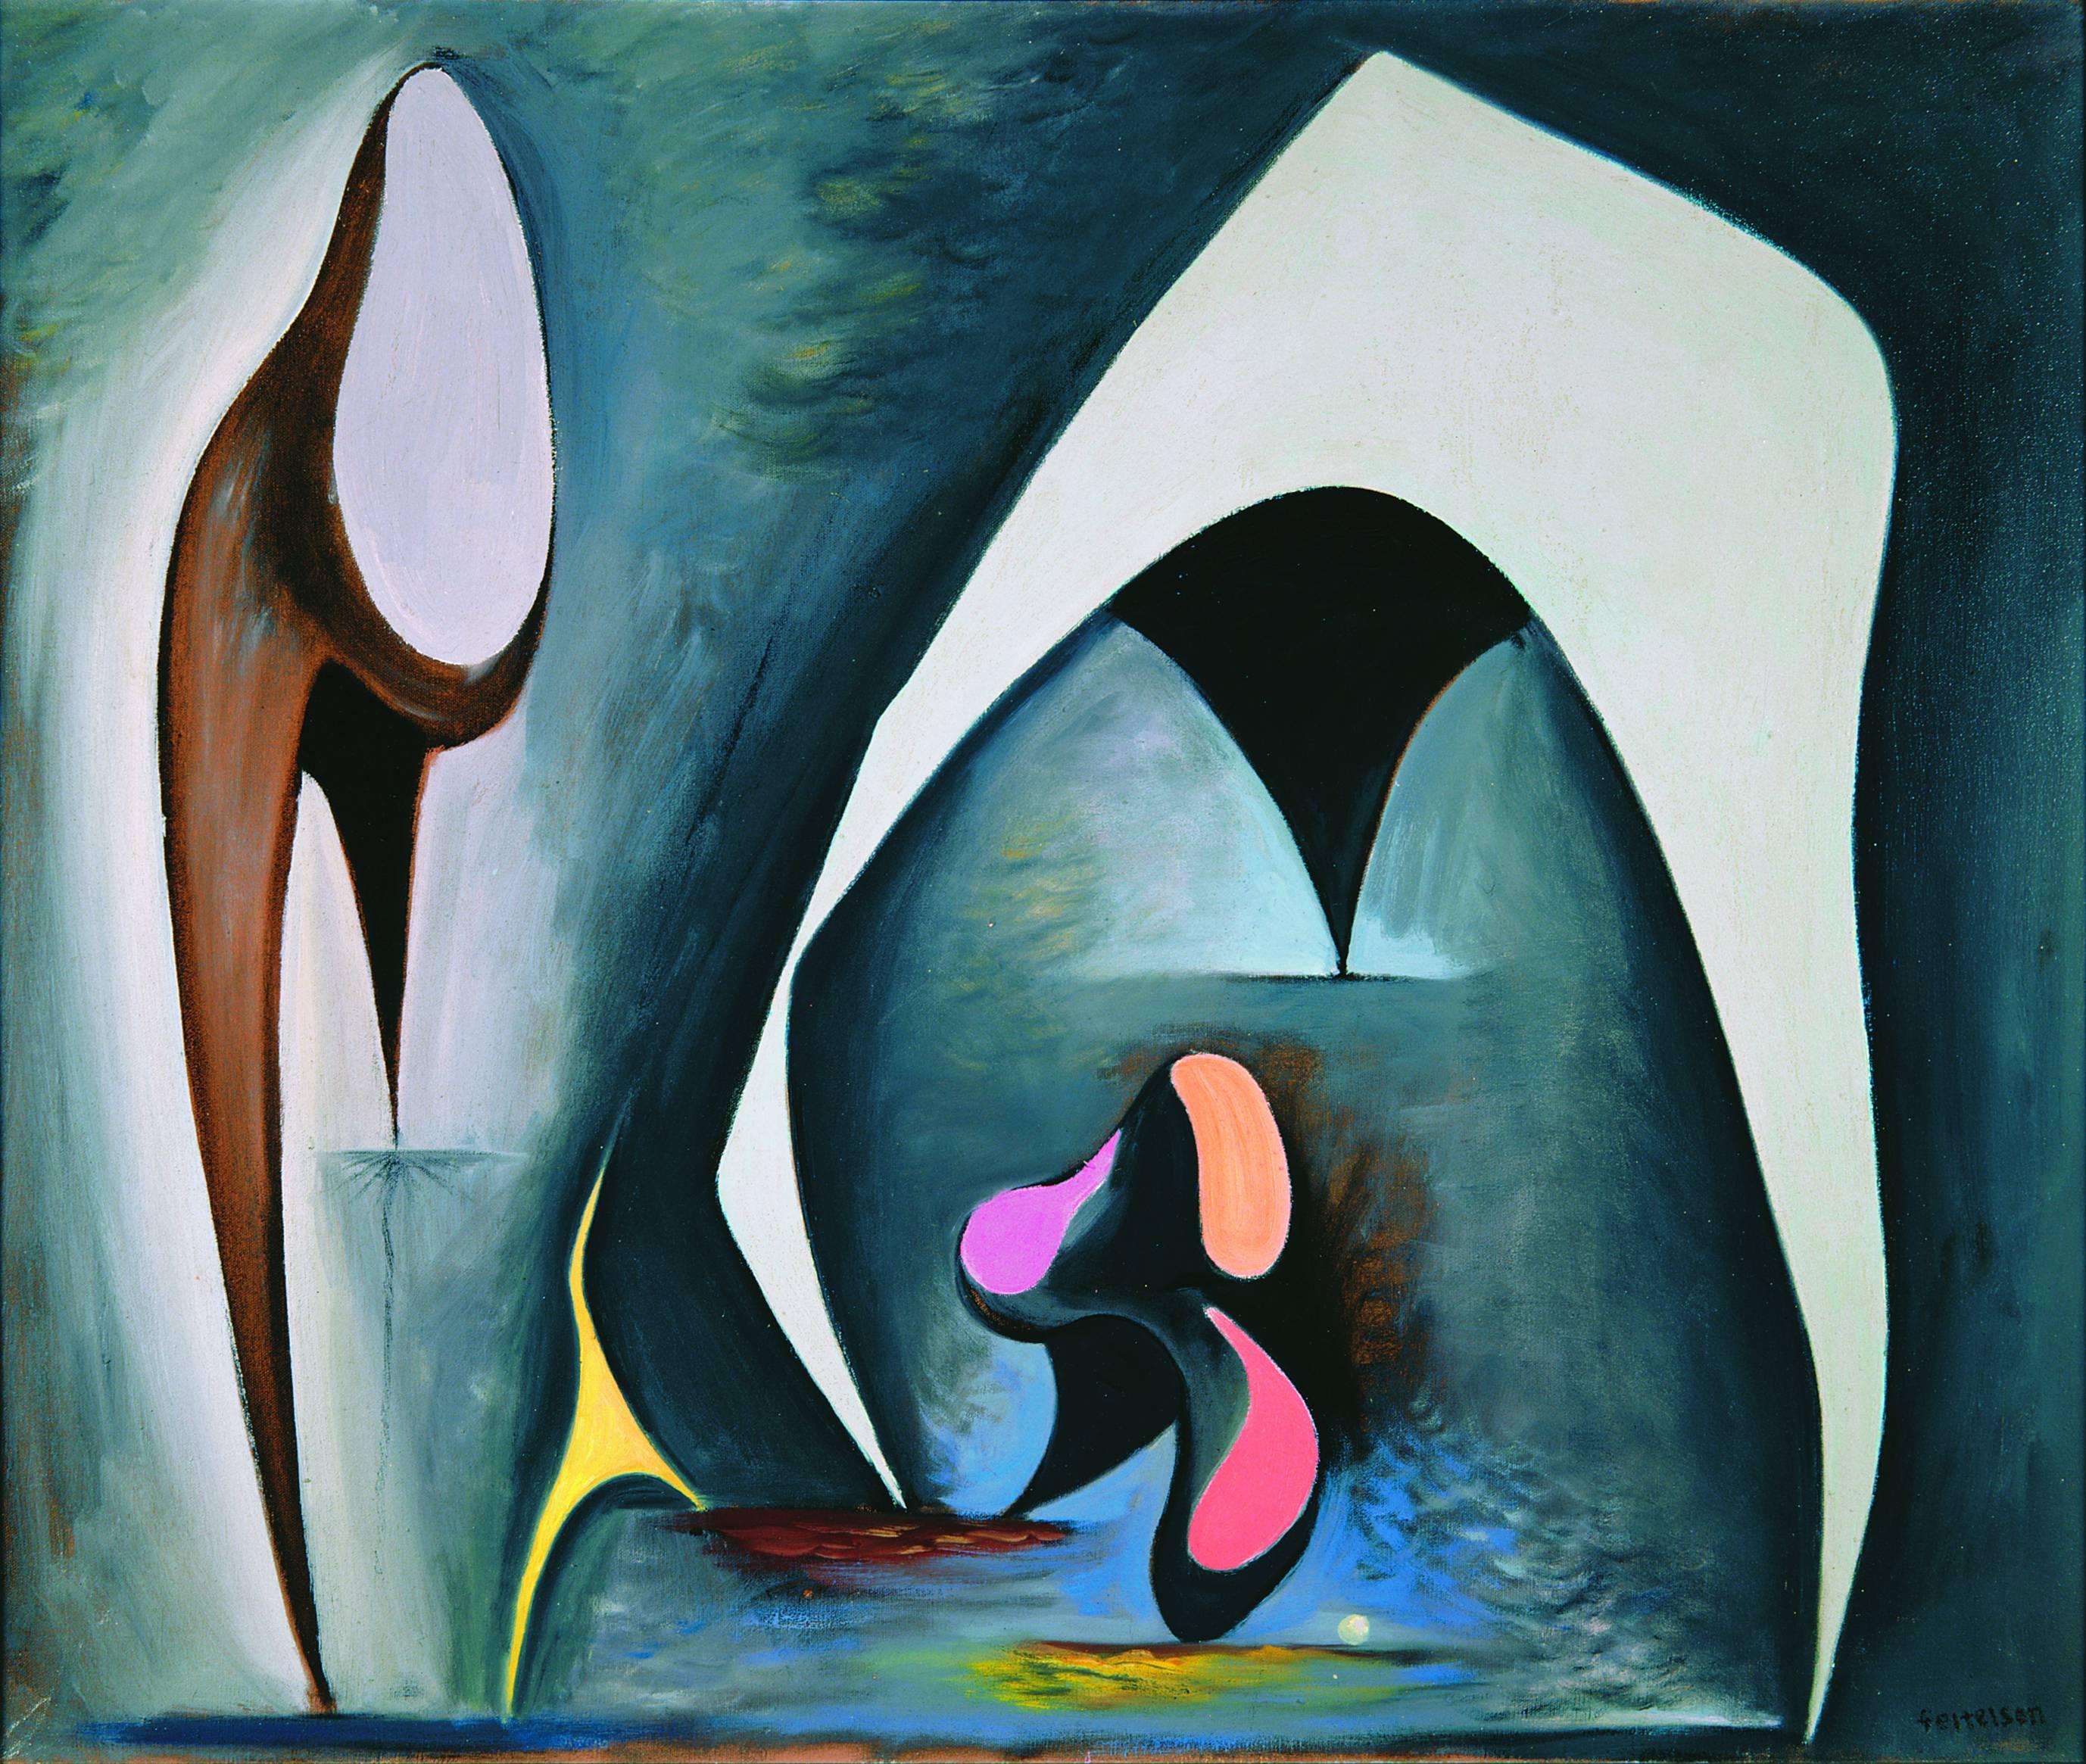 Lorser Feitelson Abstract Painting - Magical Forms, abstract Post-Surreal oil painting of figures morphing to forms